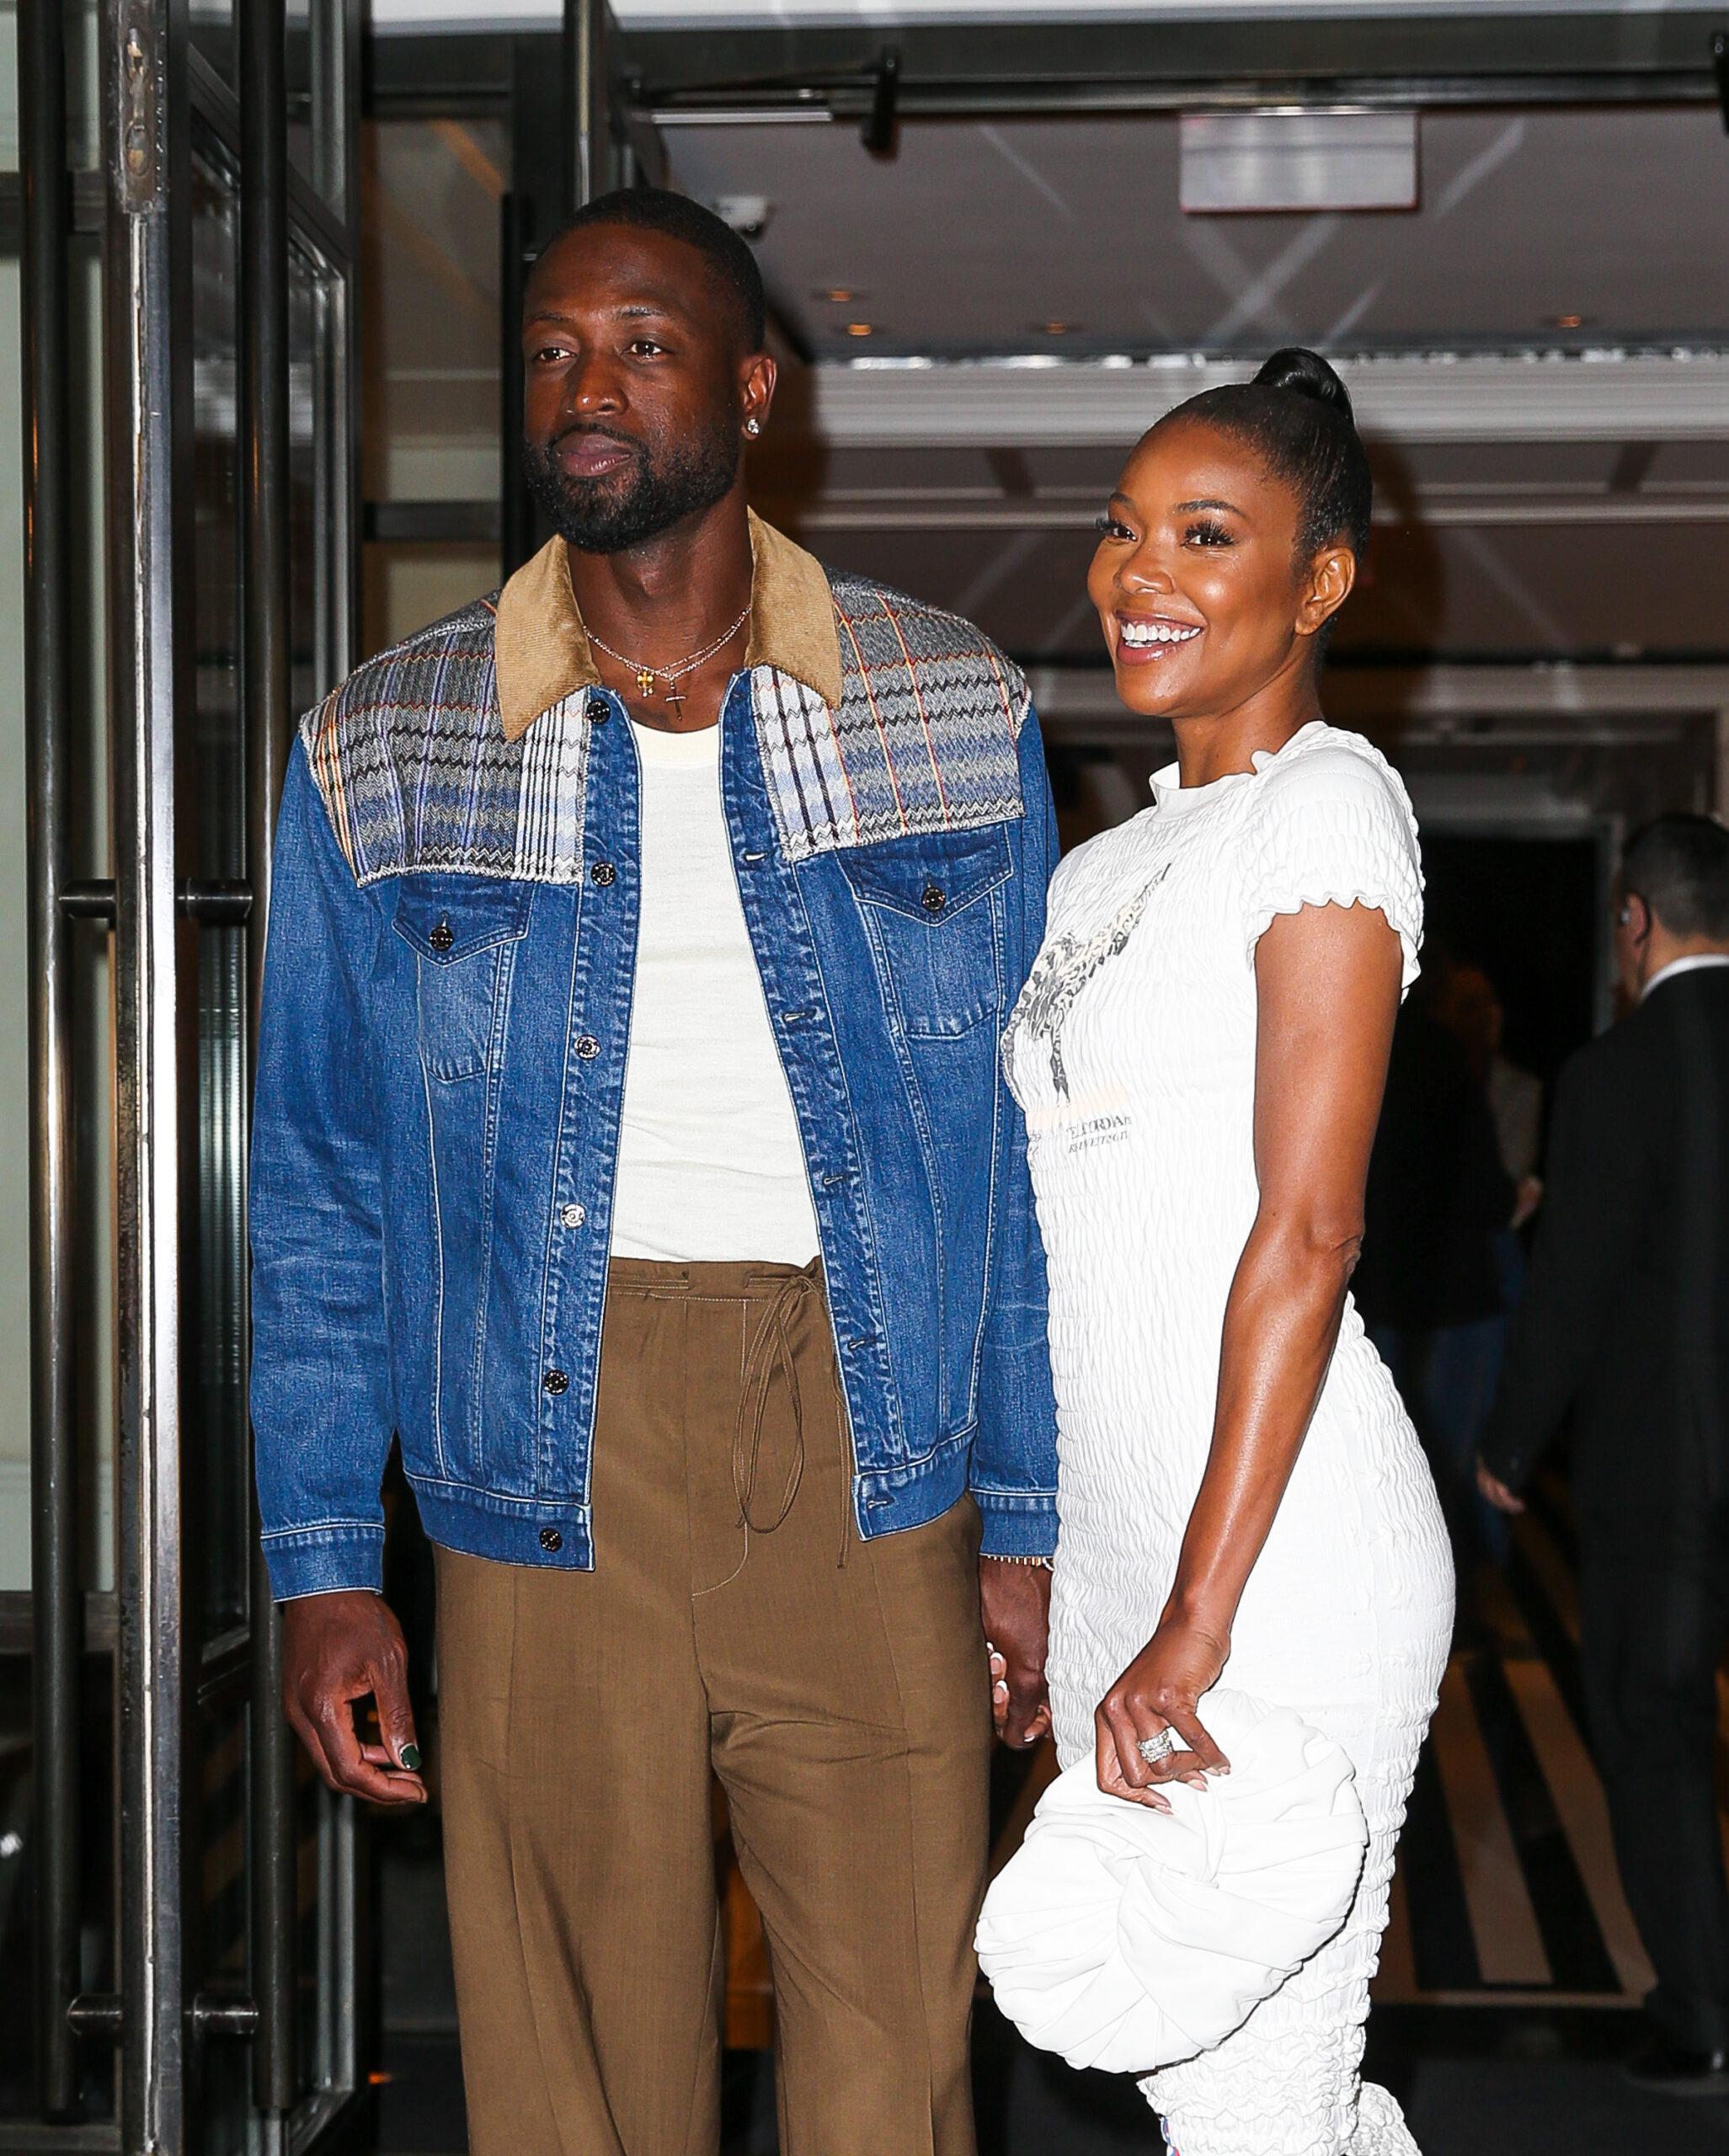 Gabrielle Union & Dwyane Wade heading out for dinner in New York City